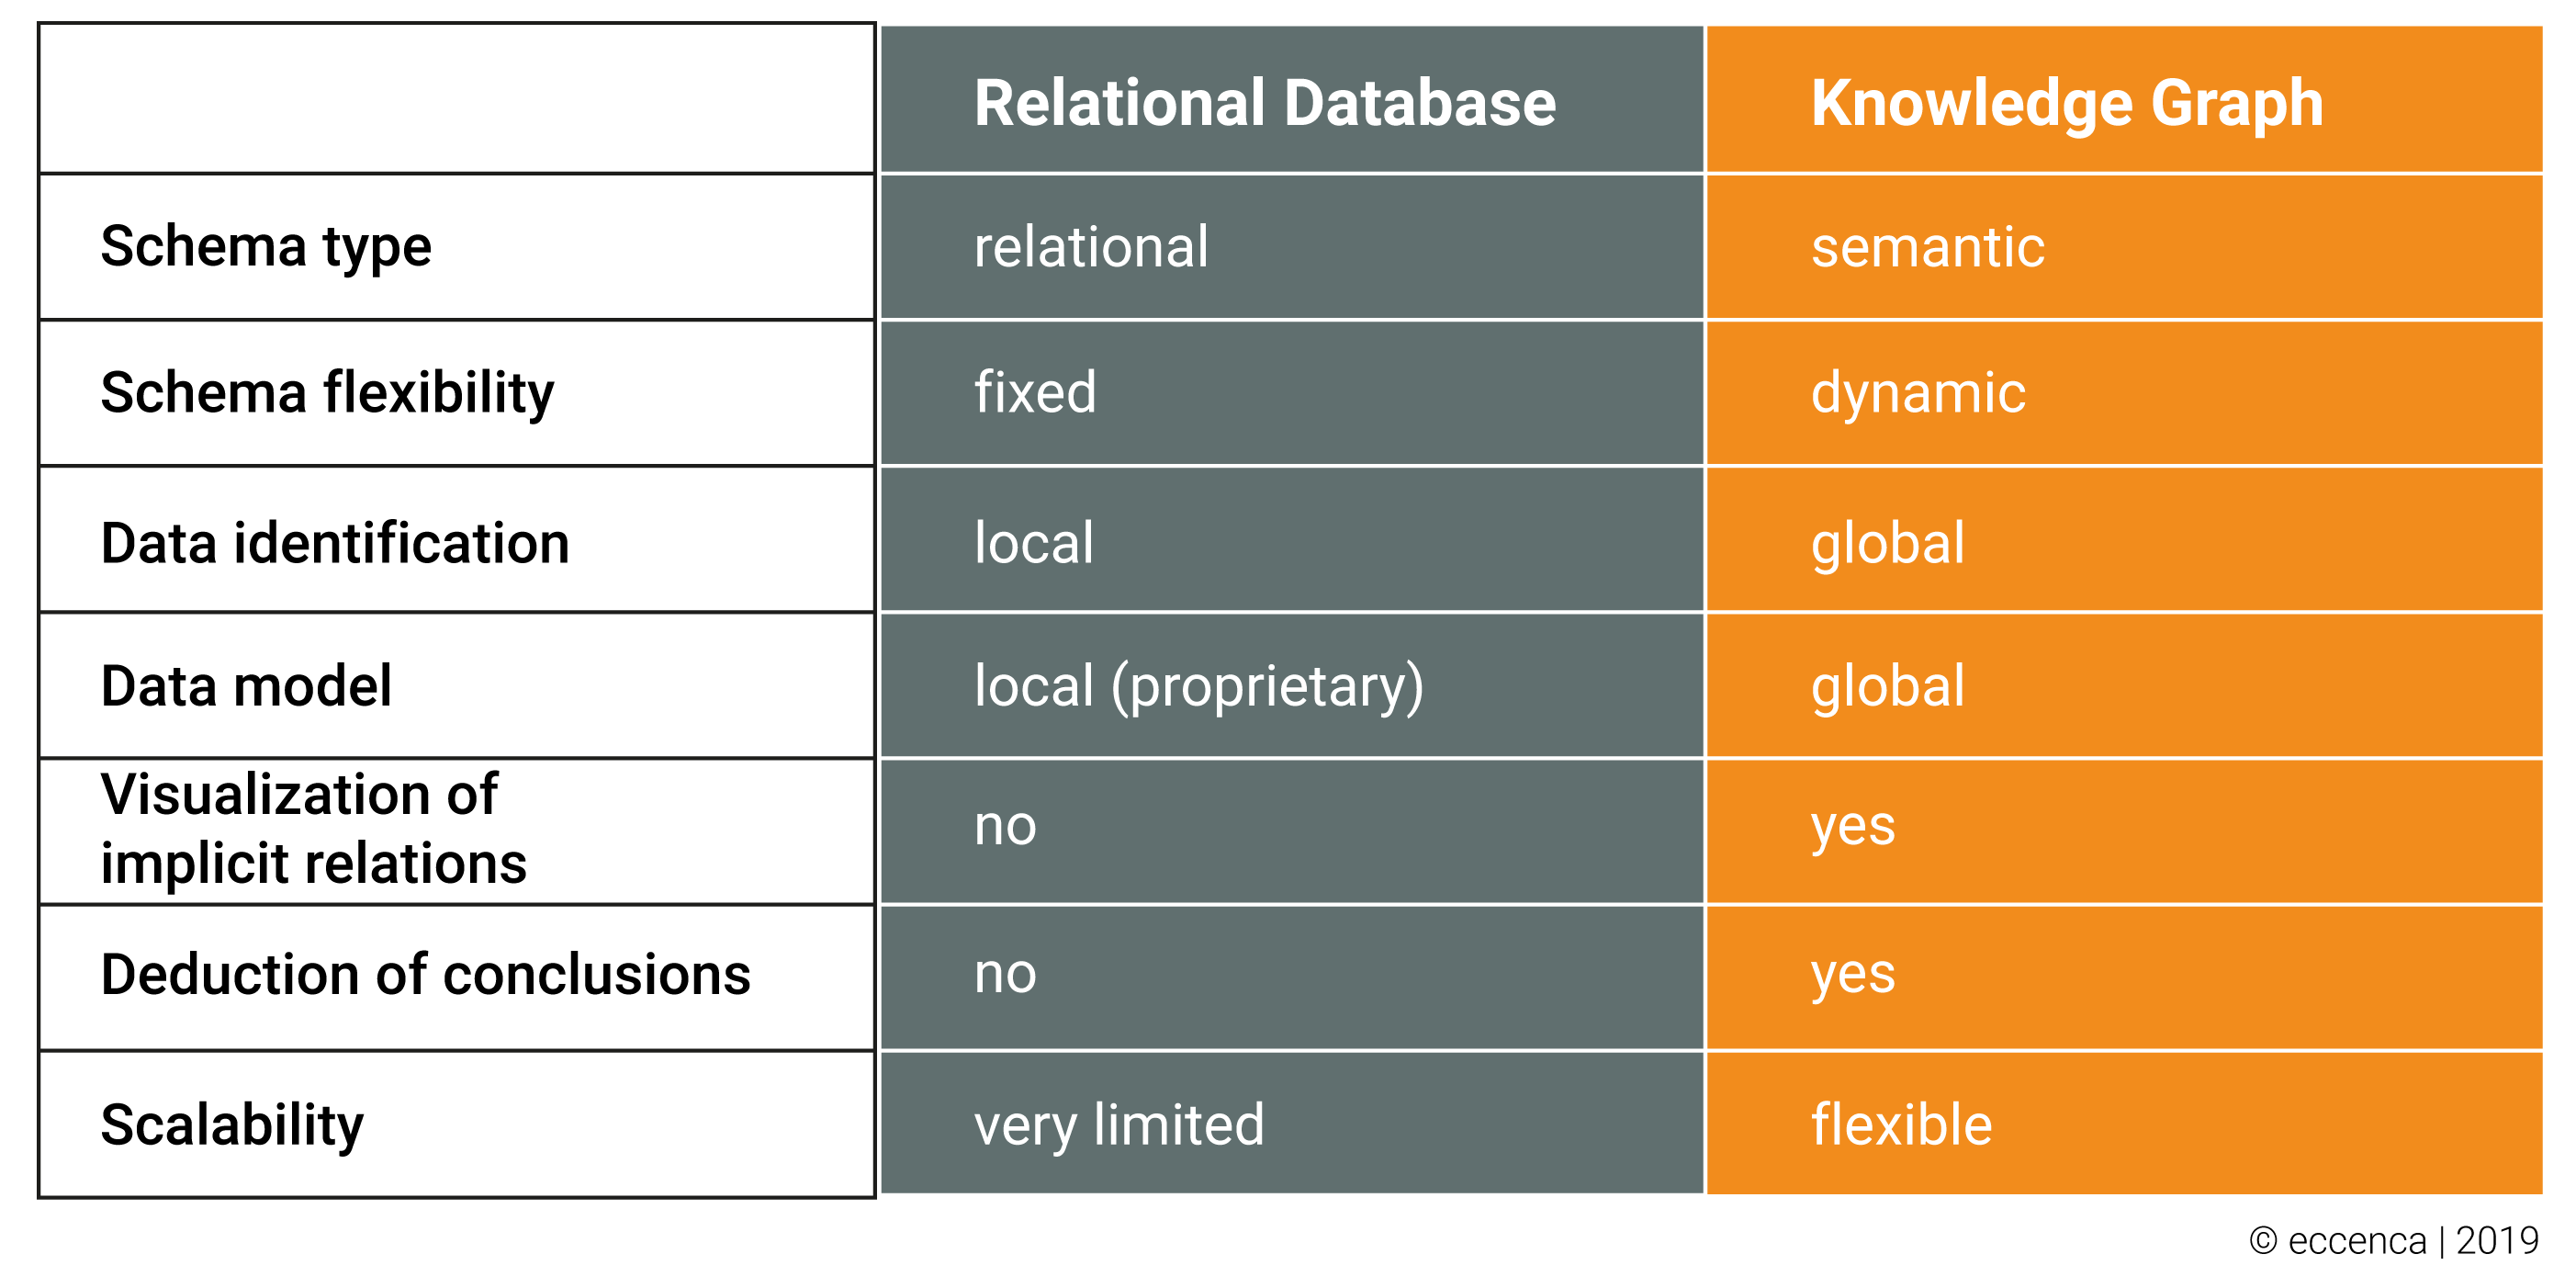 Table showing the main differences between relation database and knowledge graphs in terms of flexibility, scalability and data utilization